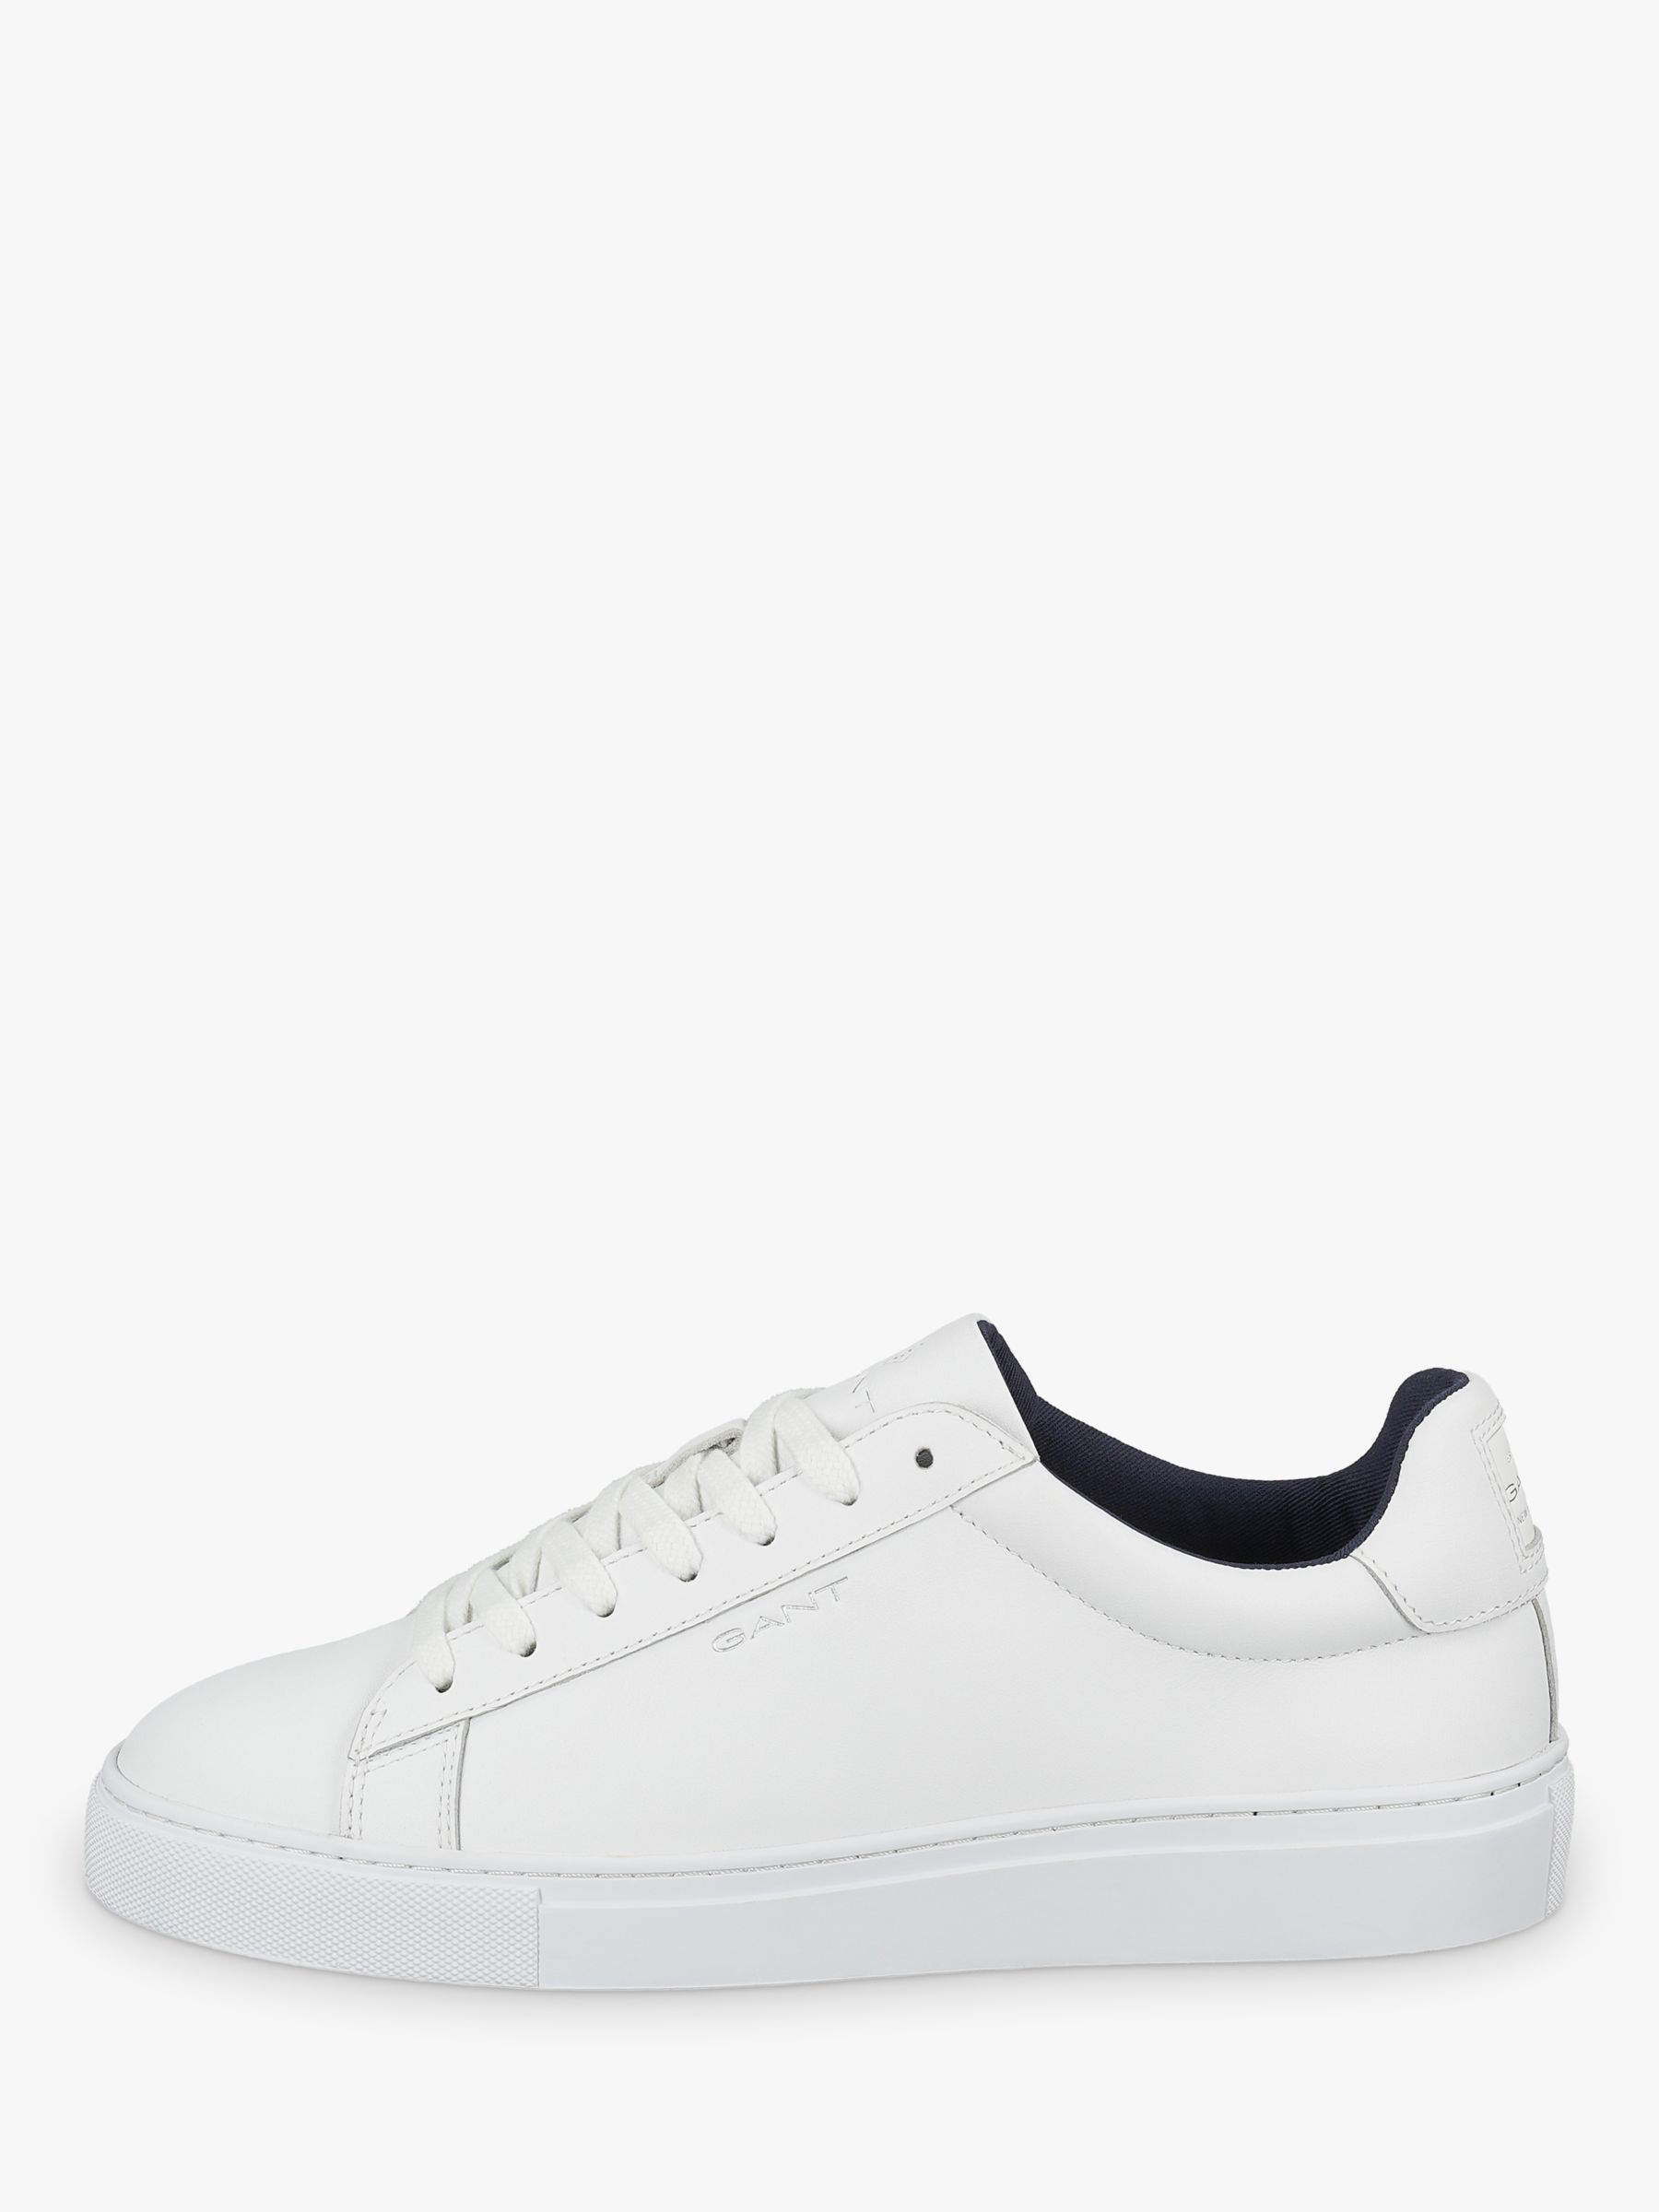 GANT Mc Julien Leather Trainers, Bright White at John Lewis & Partners